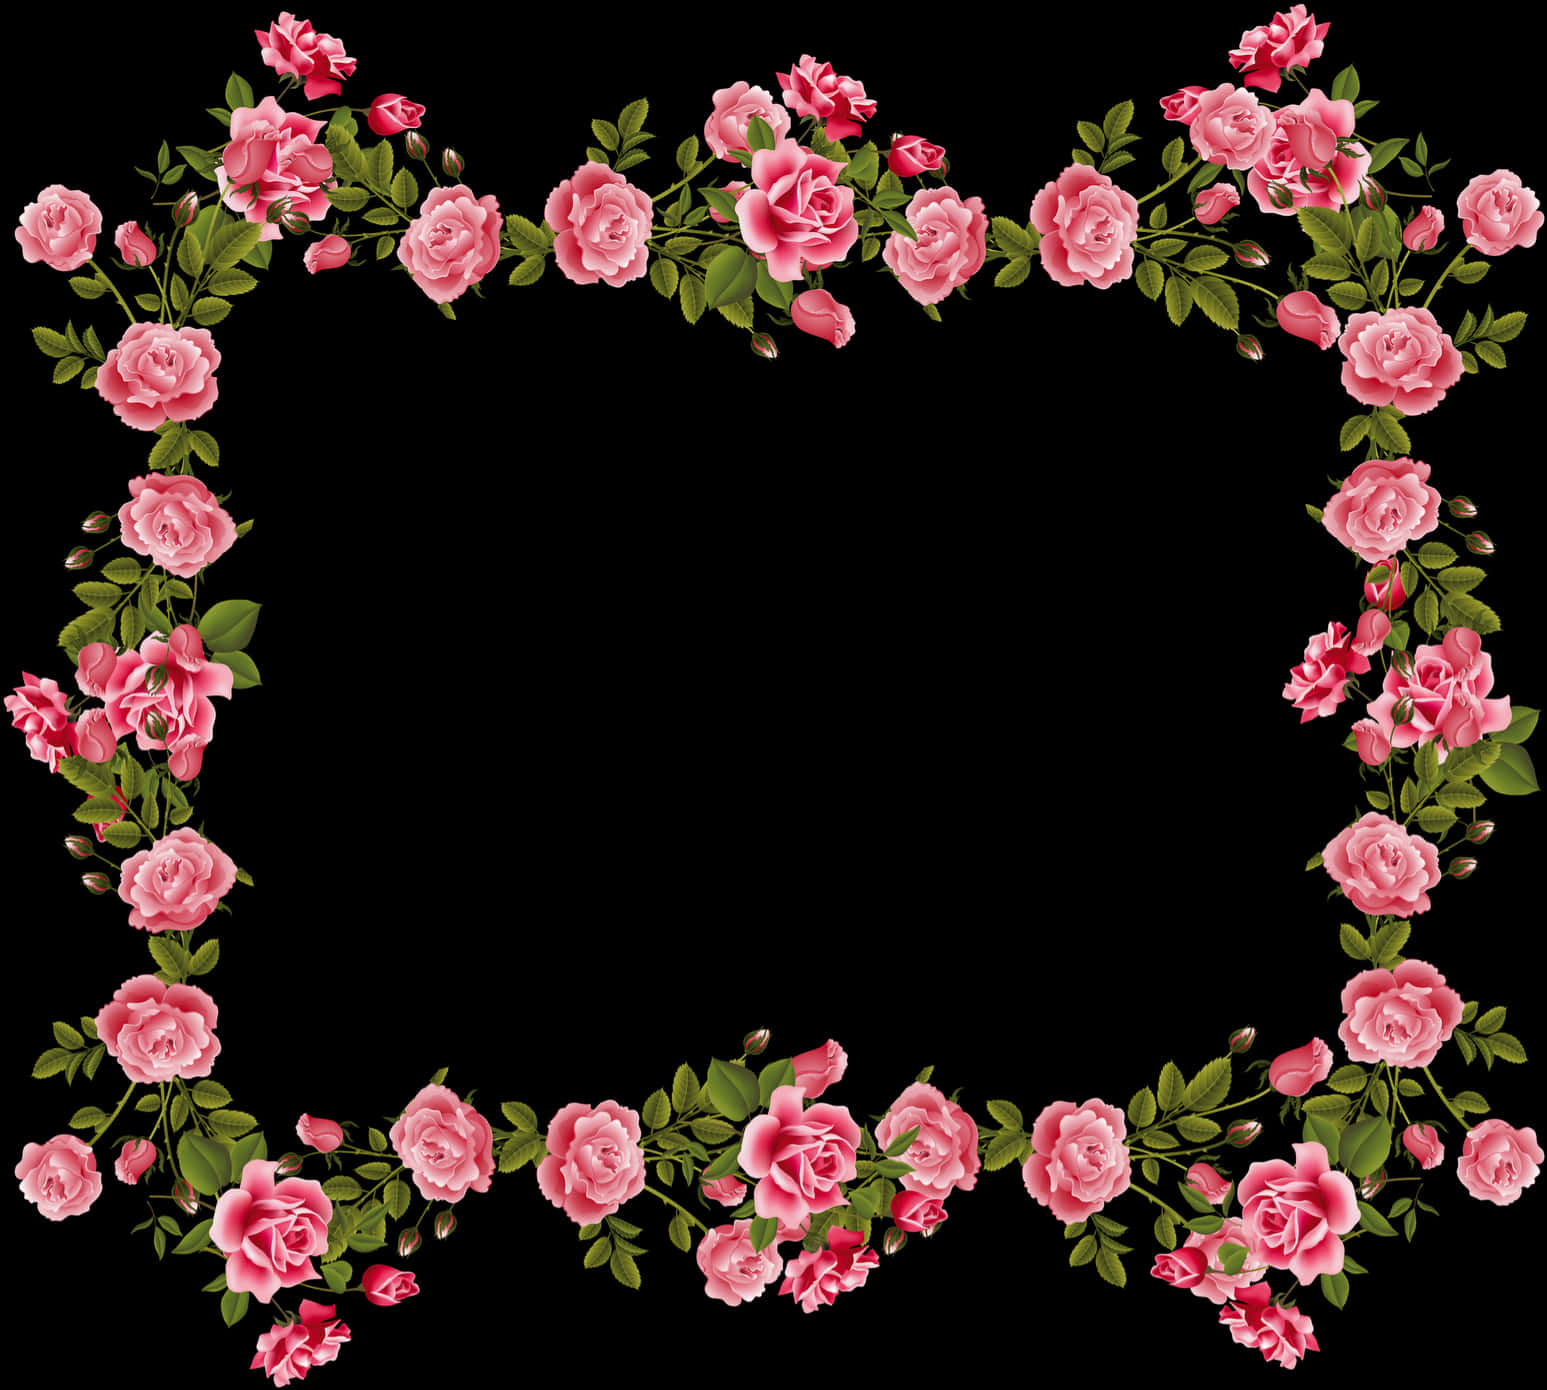 A Frame Of Pink Flowers